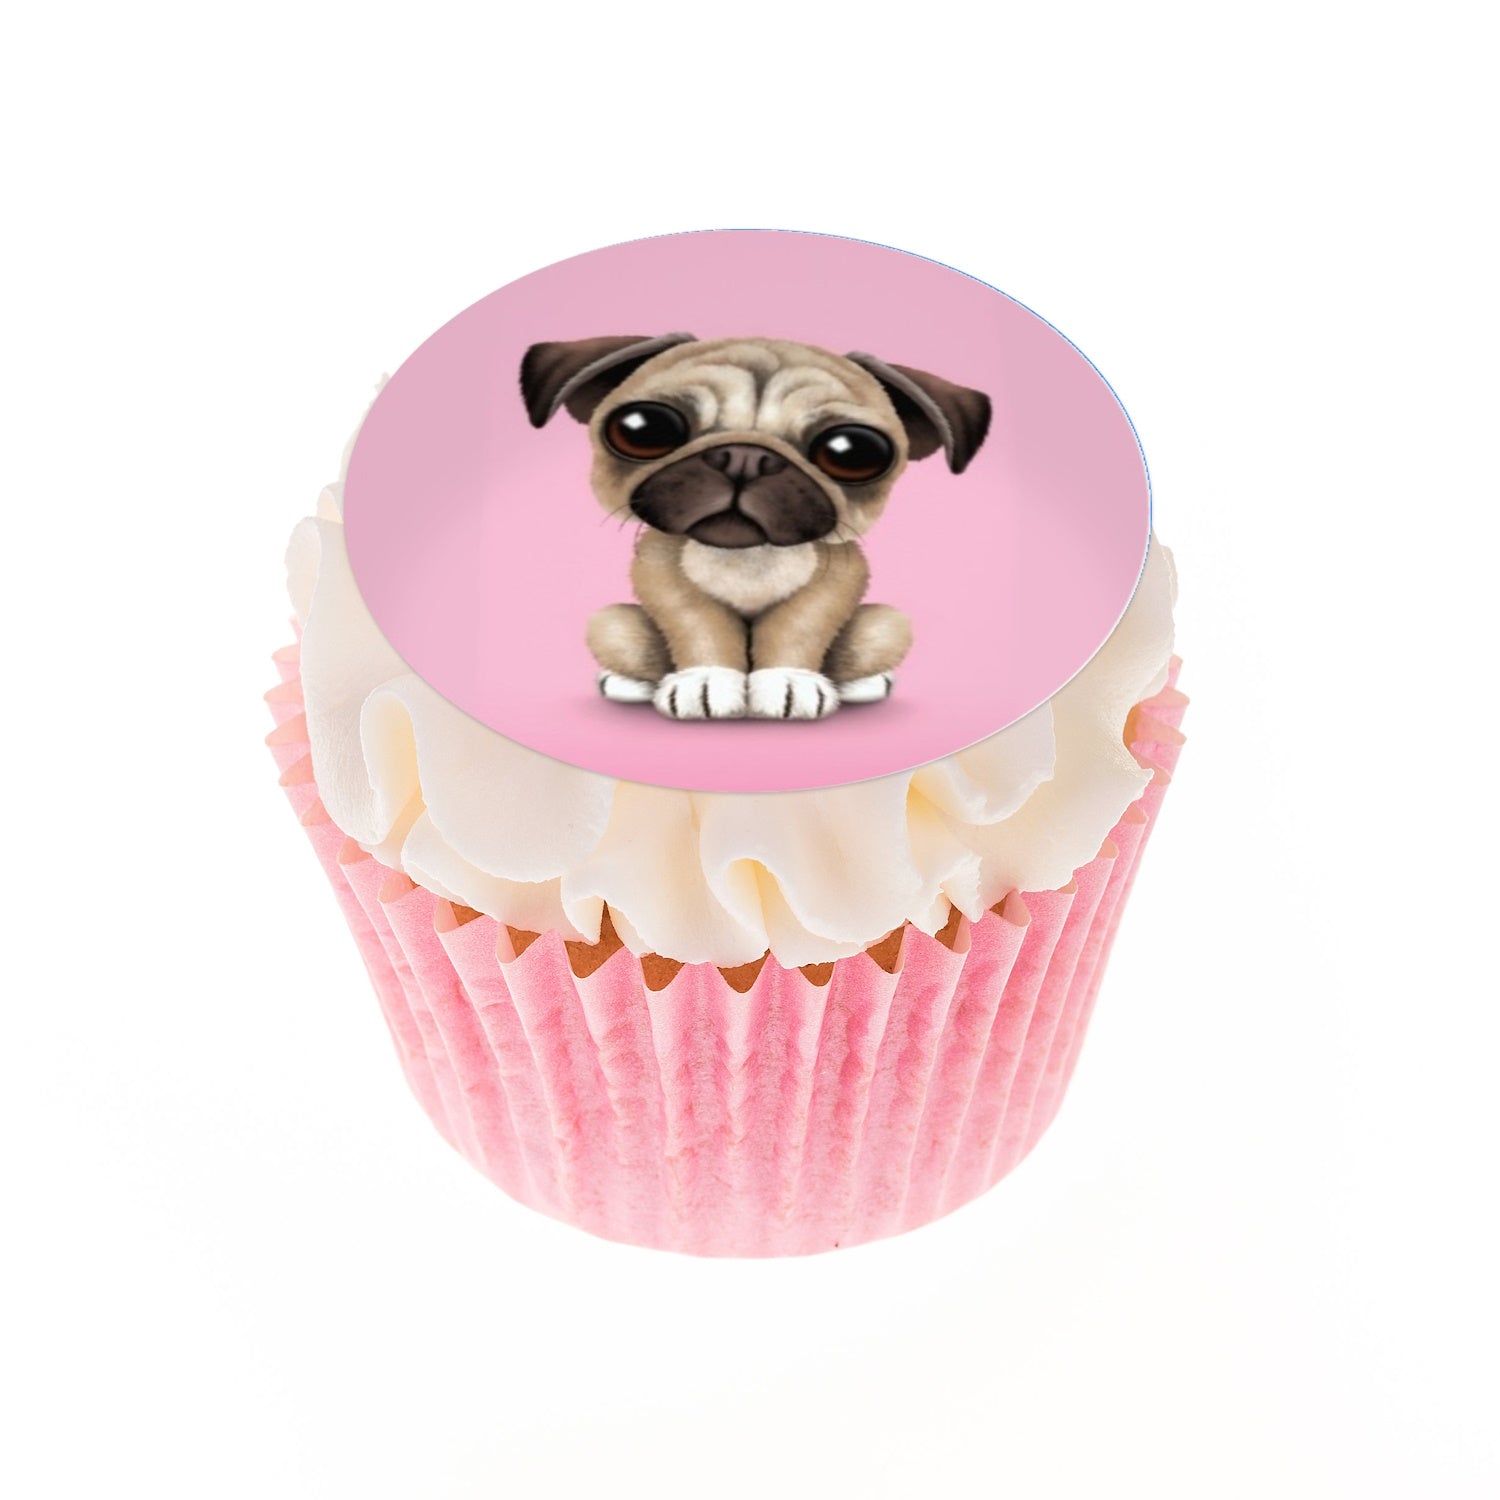 Cute edible cake toppers with a pink pug puppy image